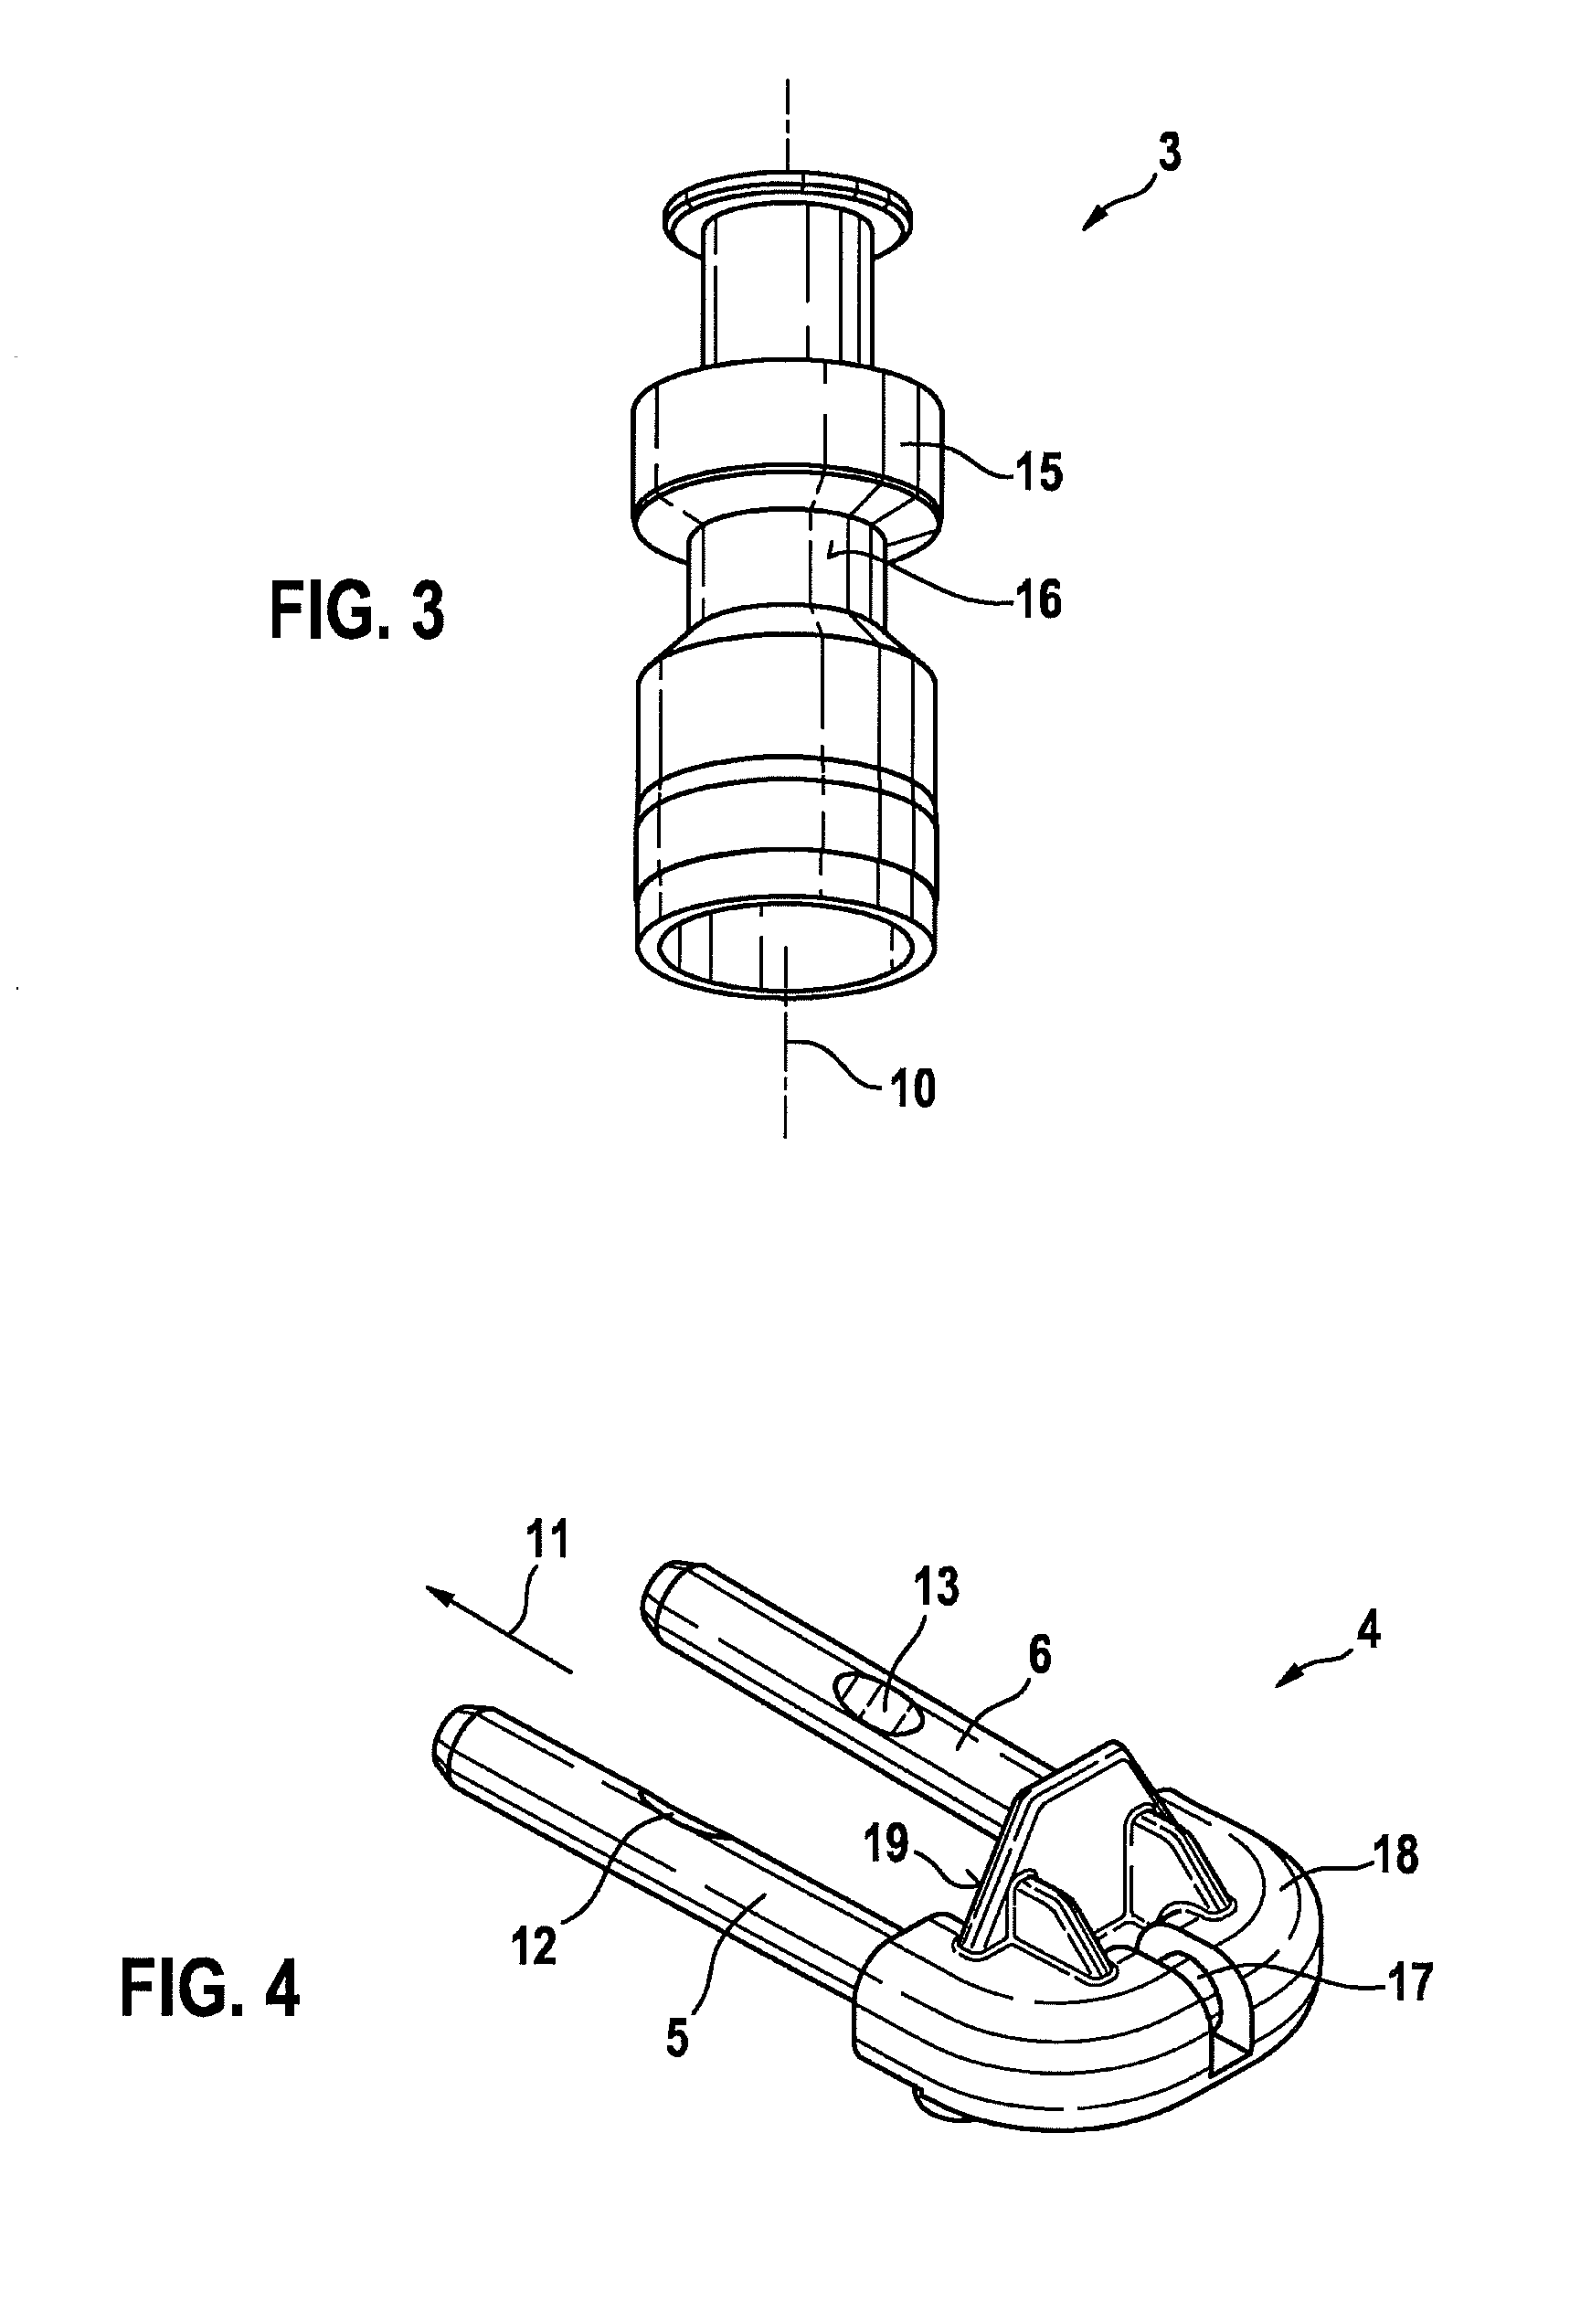 System having a fuel distributor and multiple fuel injectors